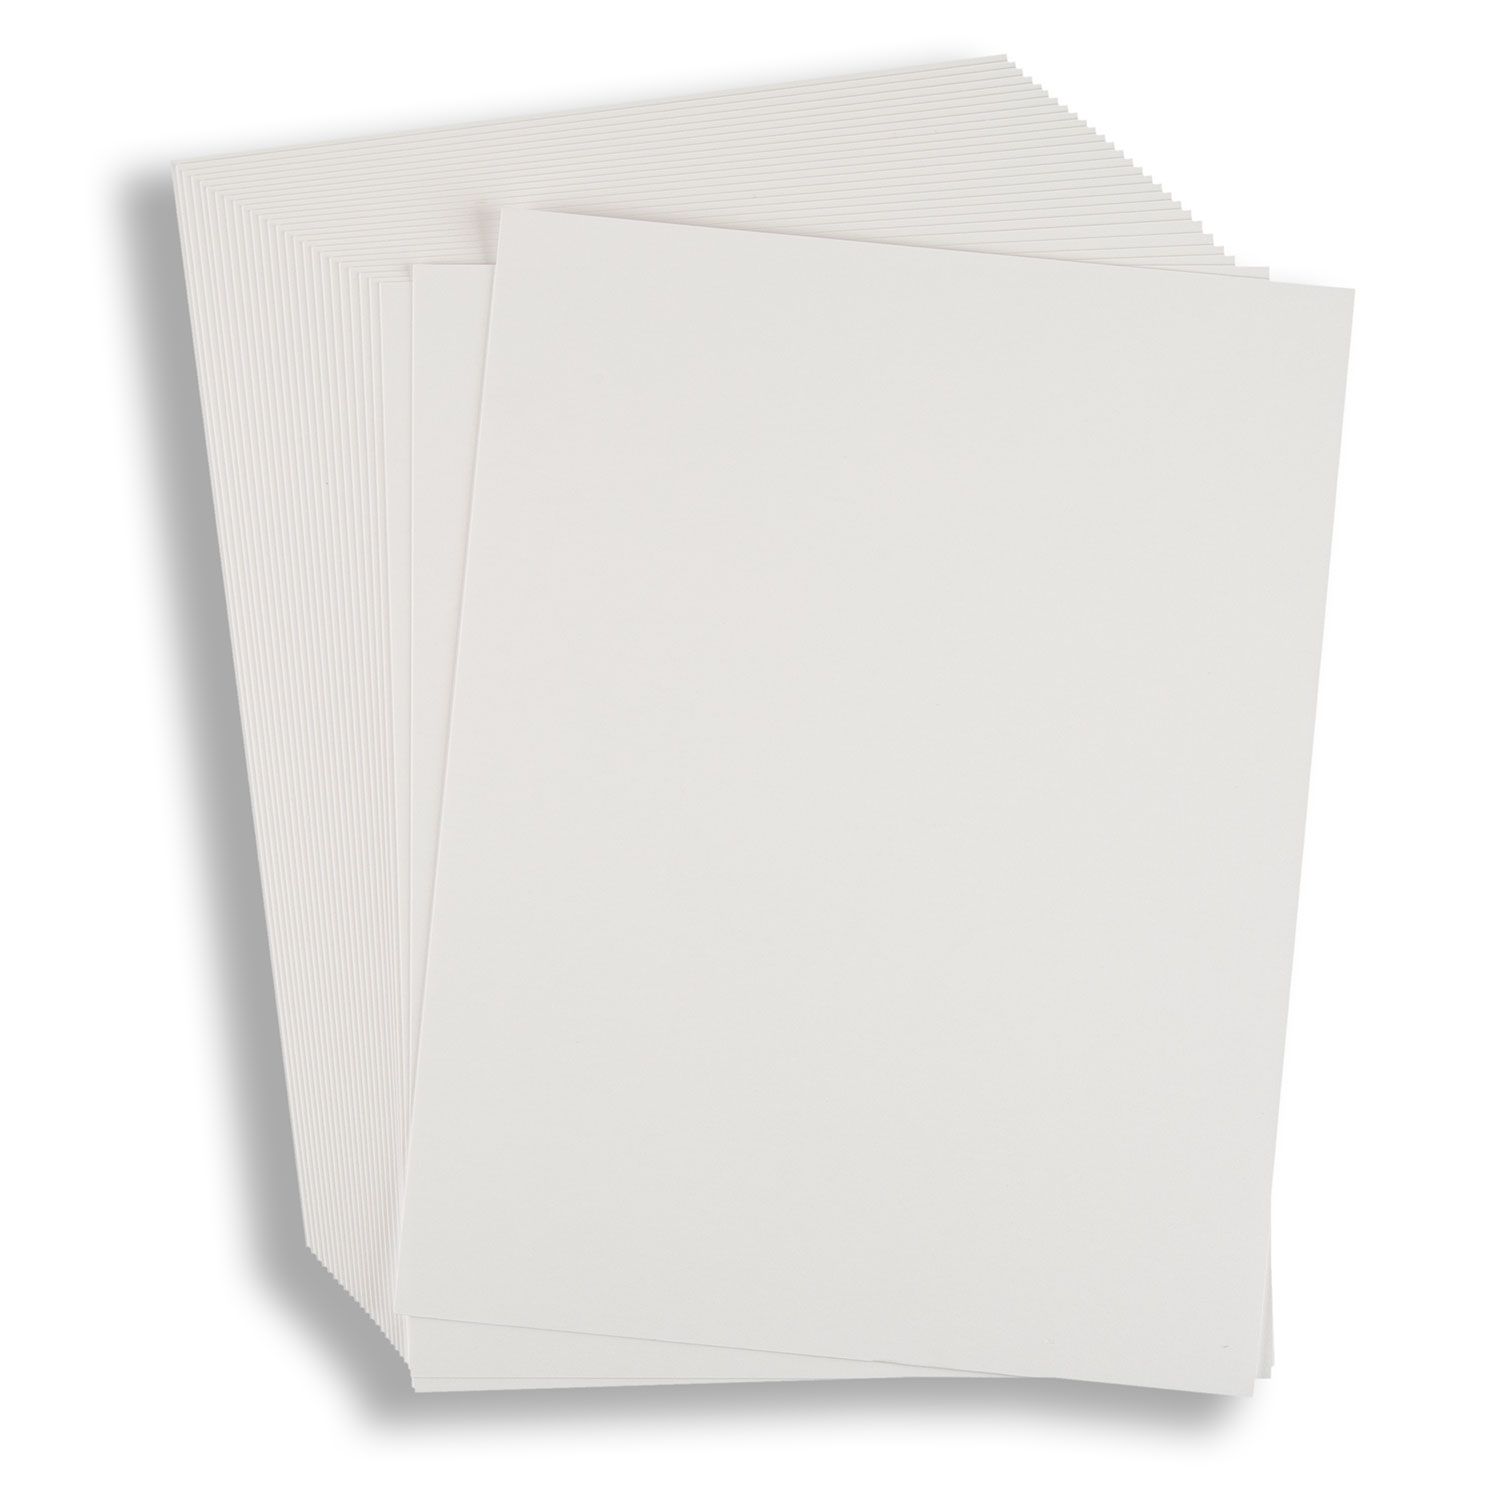 Hero Arts Hues A4 Solid Core Cardstock Pick N Mix - Choose 2 - 20 Sheets - Dove White